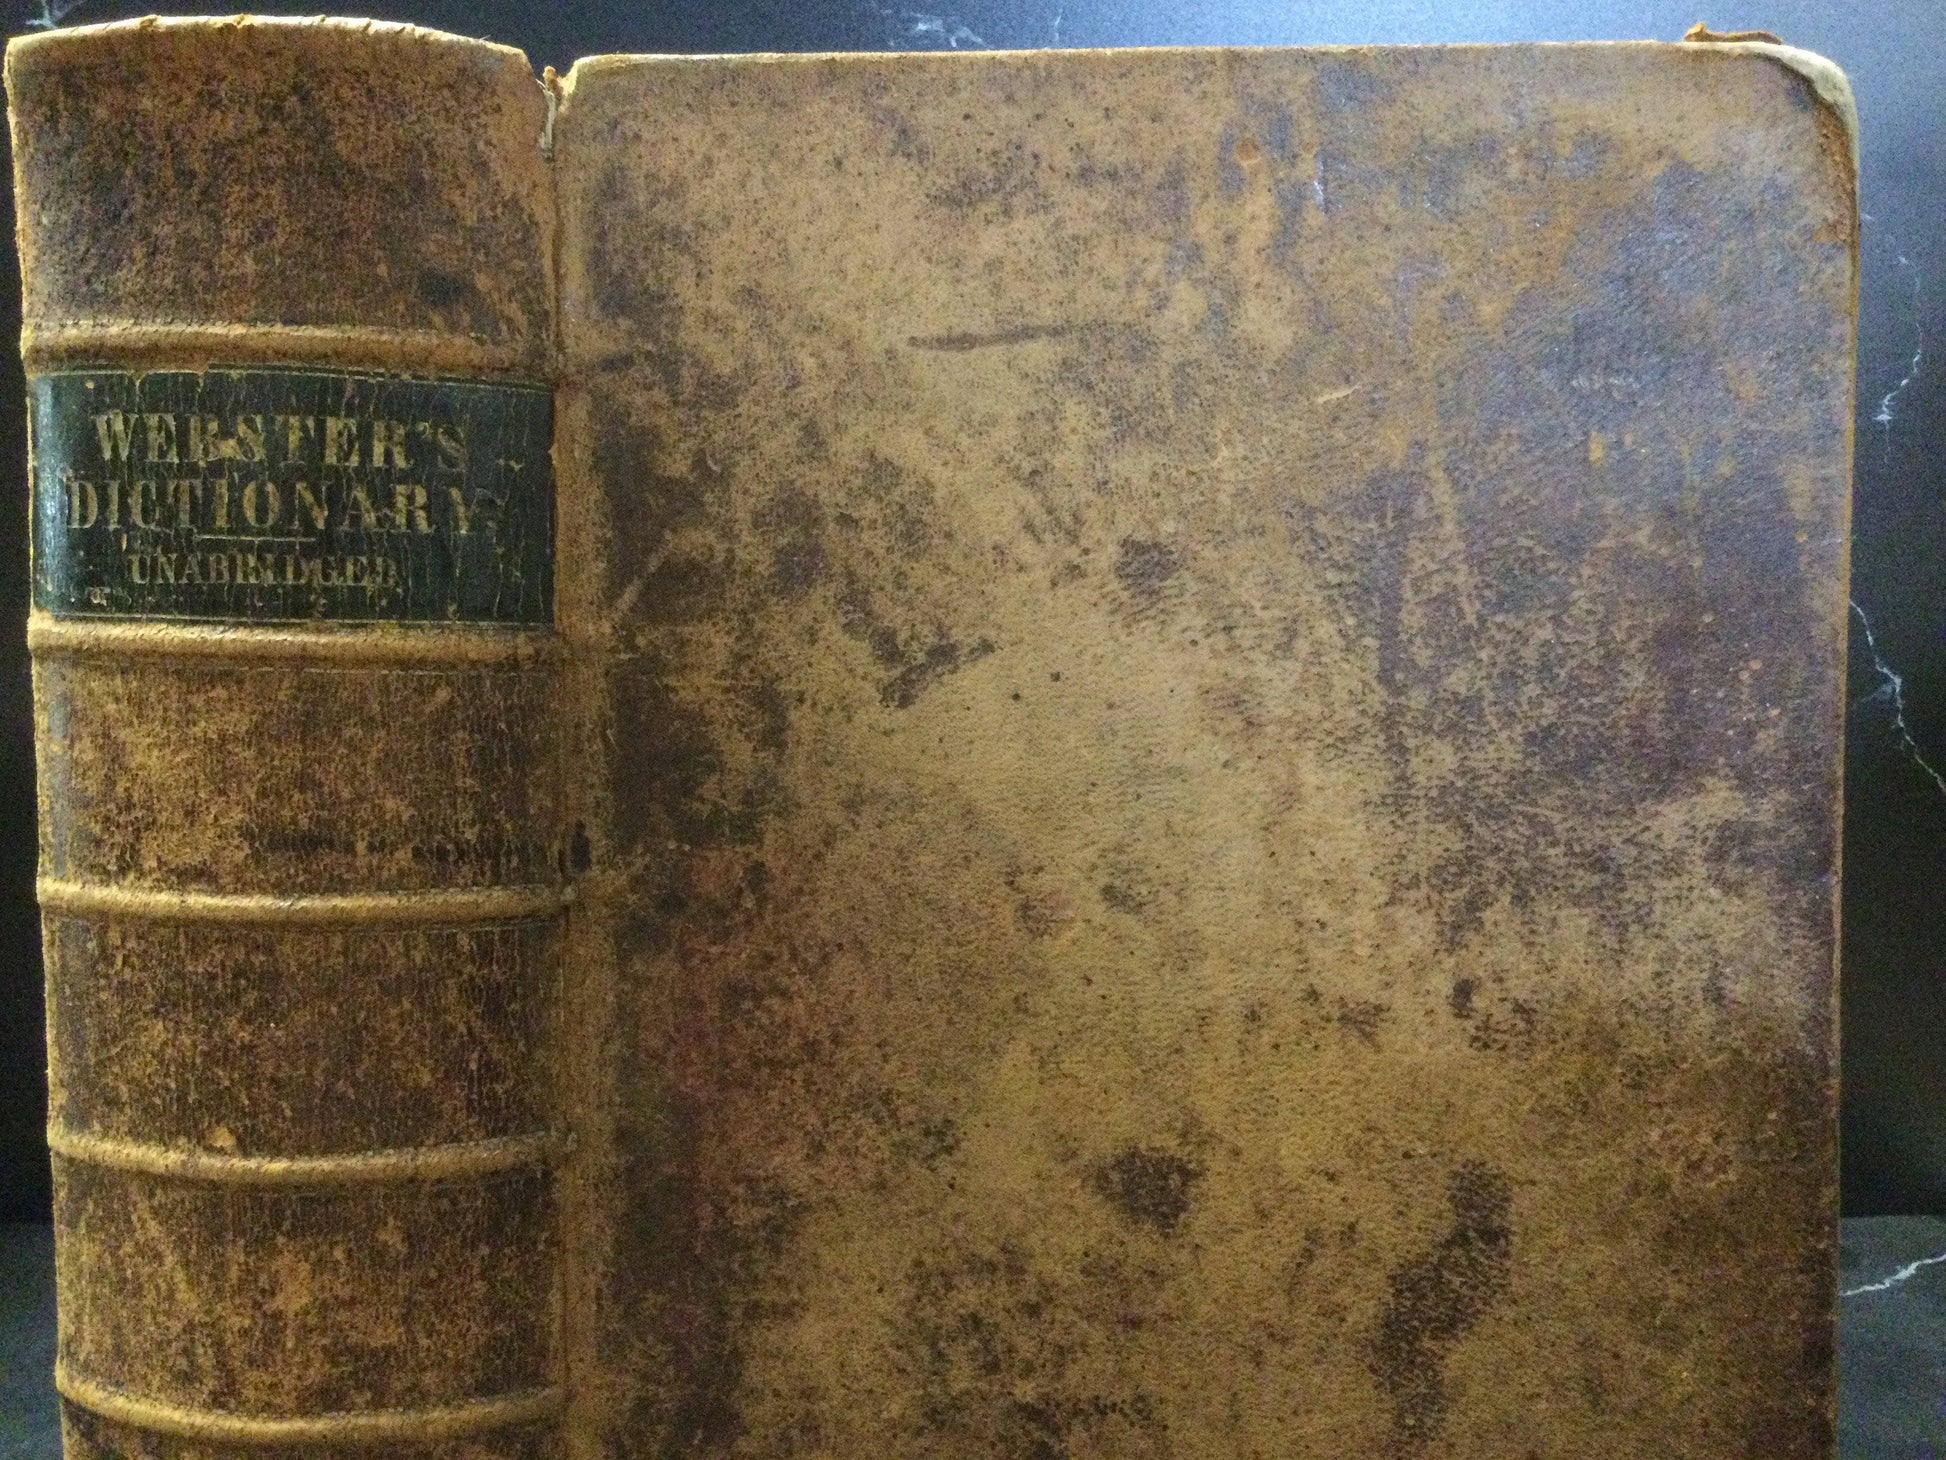 TheBookBundler Uber Rare Book Vault Price RARE American Dictionary of the English Language 1850's | Noah Webster | Revised and Enlarged | Antiquarian Oversized Leather Bound